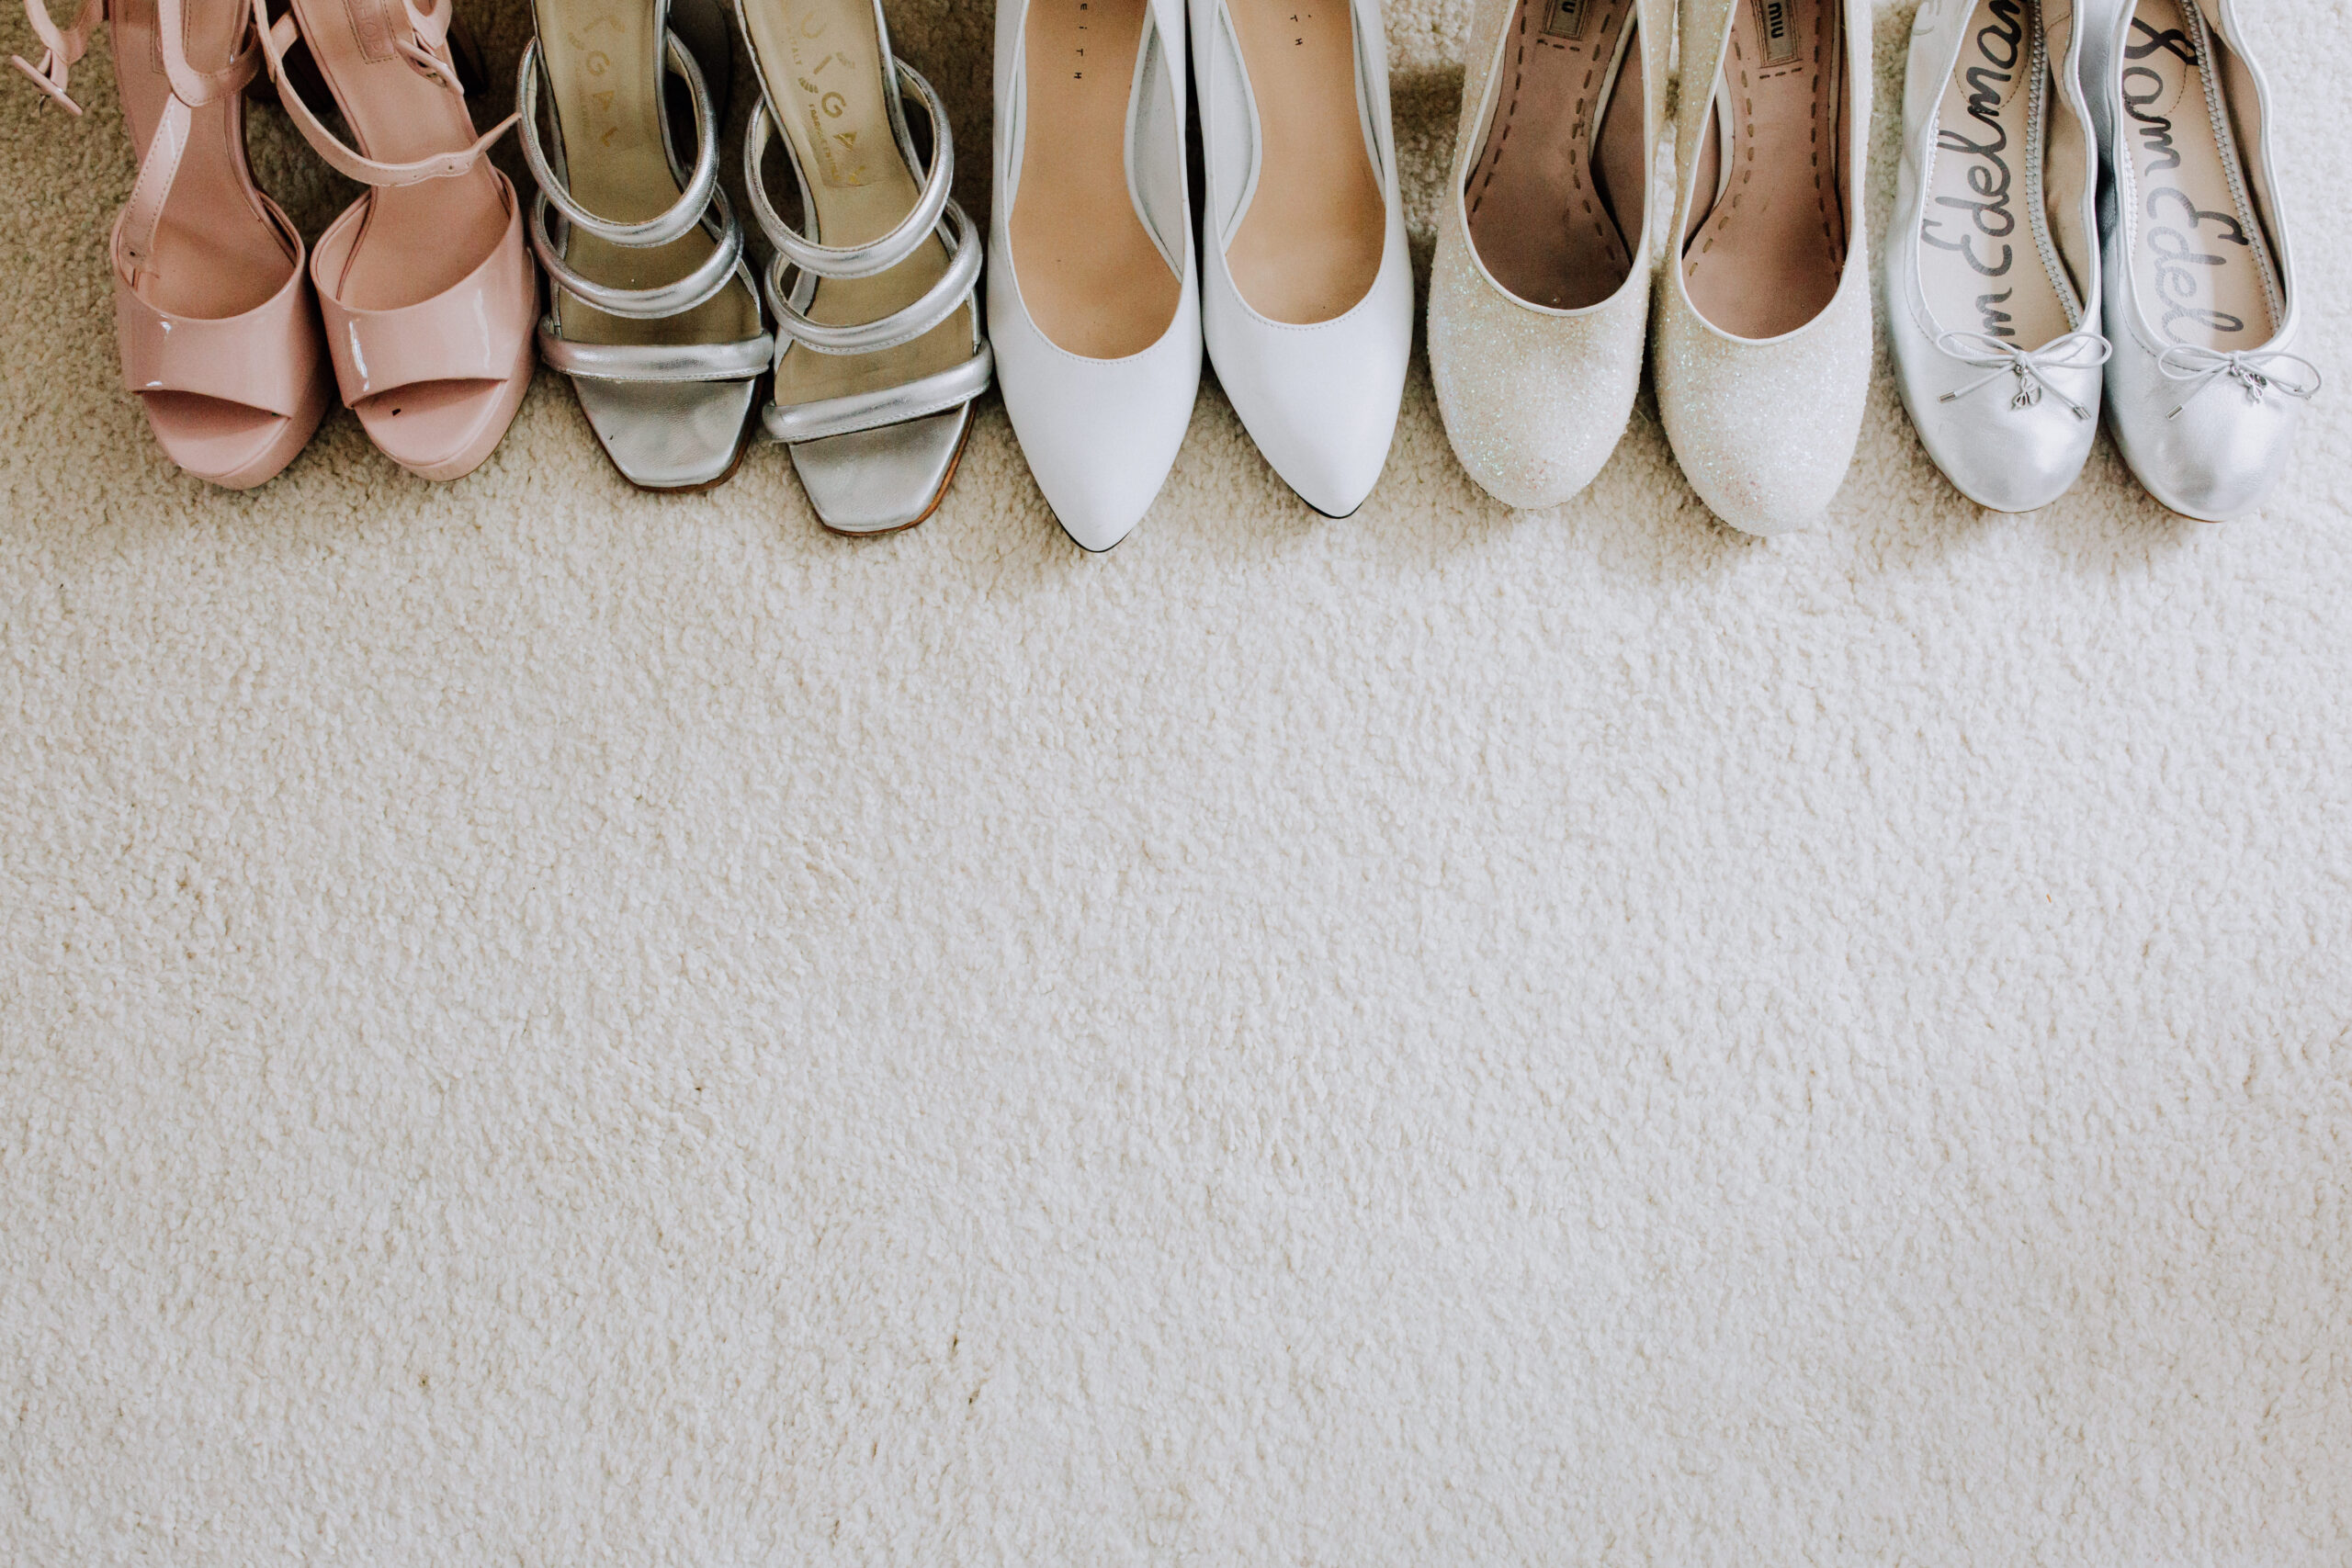 brides shoes sit with the bridesmaids shoes before the wedding ceremony 